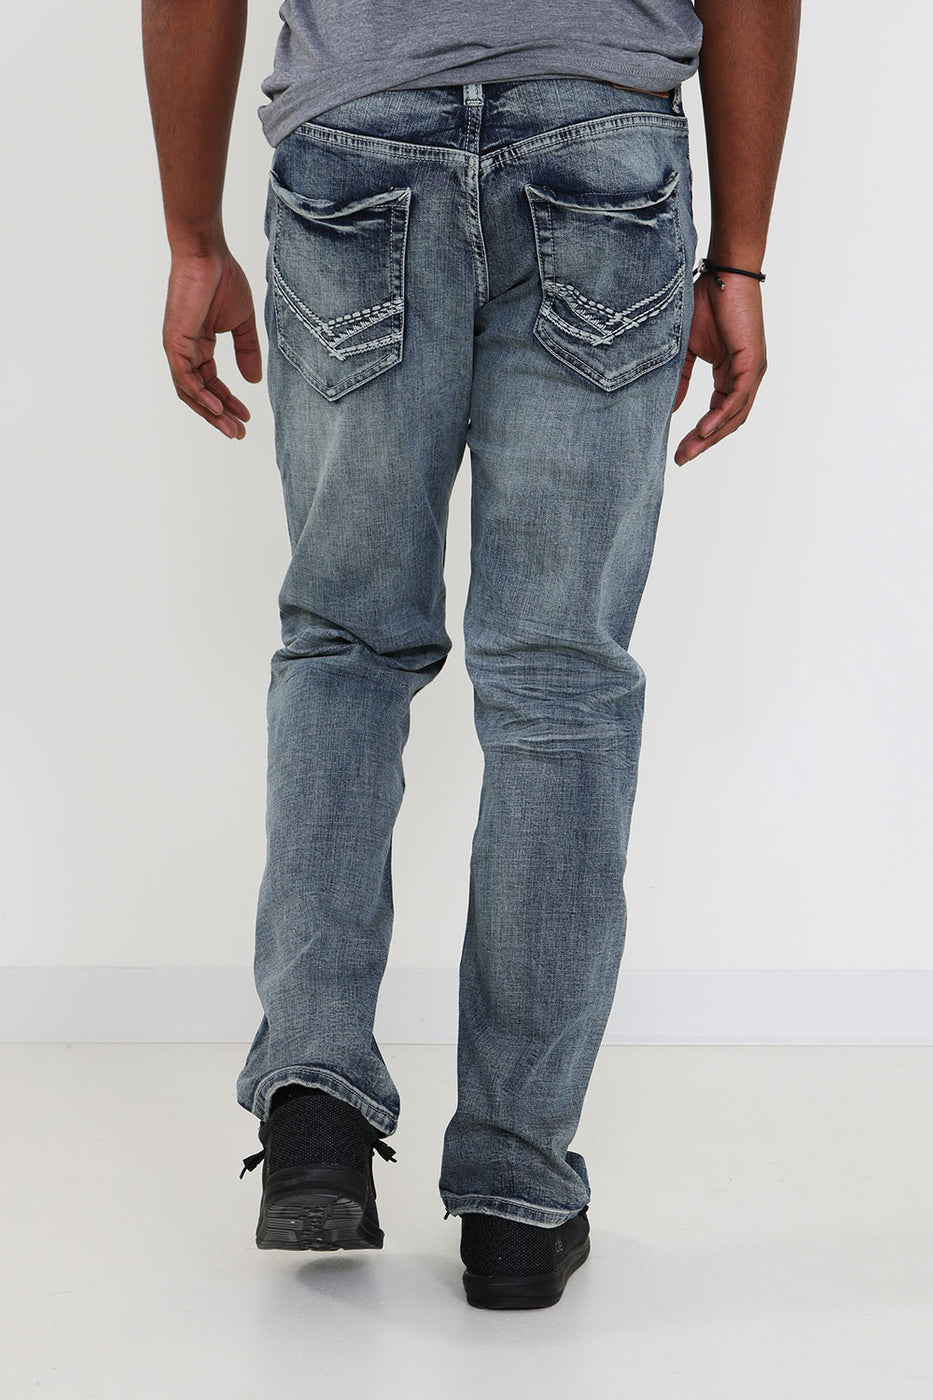 EASY RIDER BOOTCUT COOLMAX STRETCH JEAN | Lucky Brand